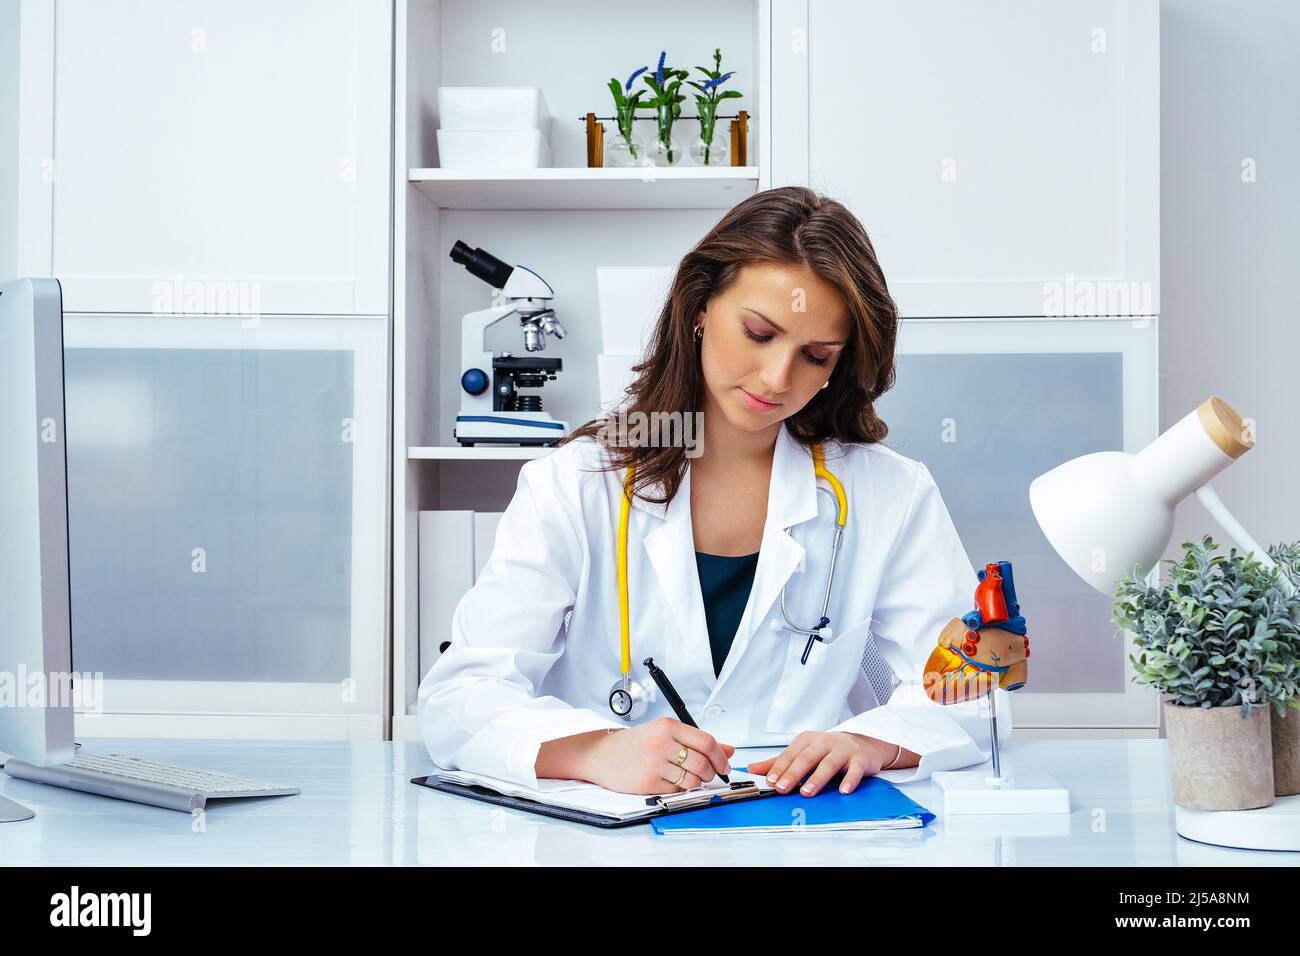 thoughtful female doctor in office healthcare industry Stock Photo